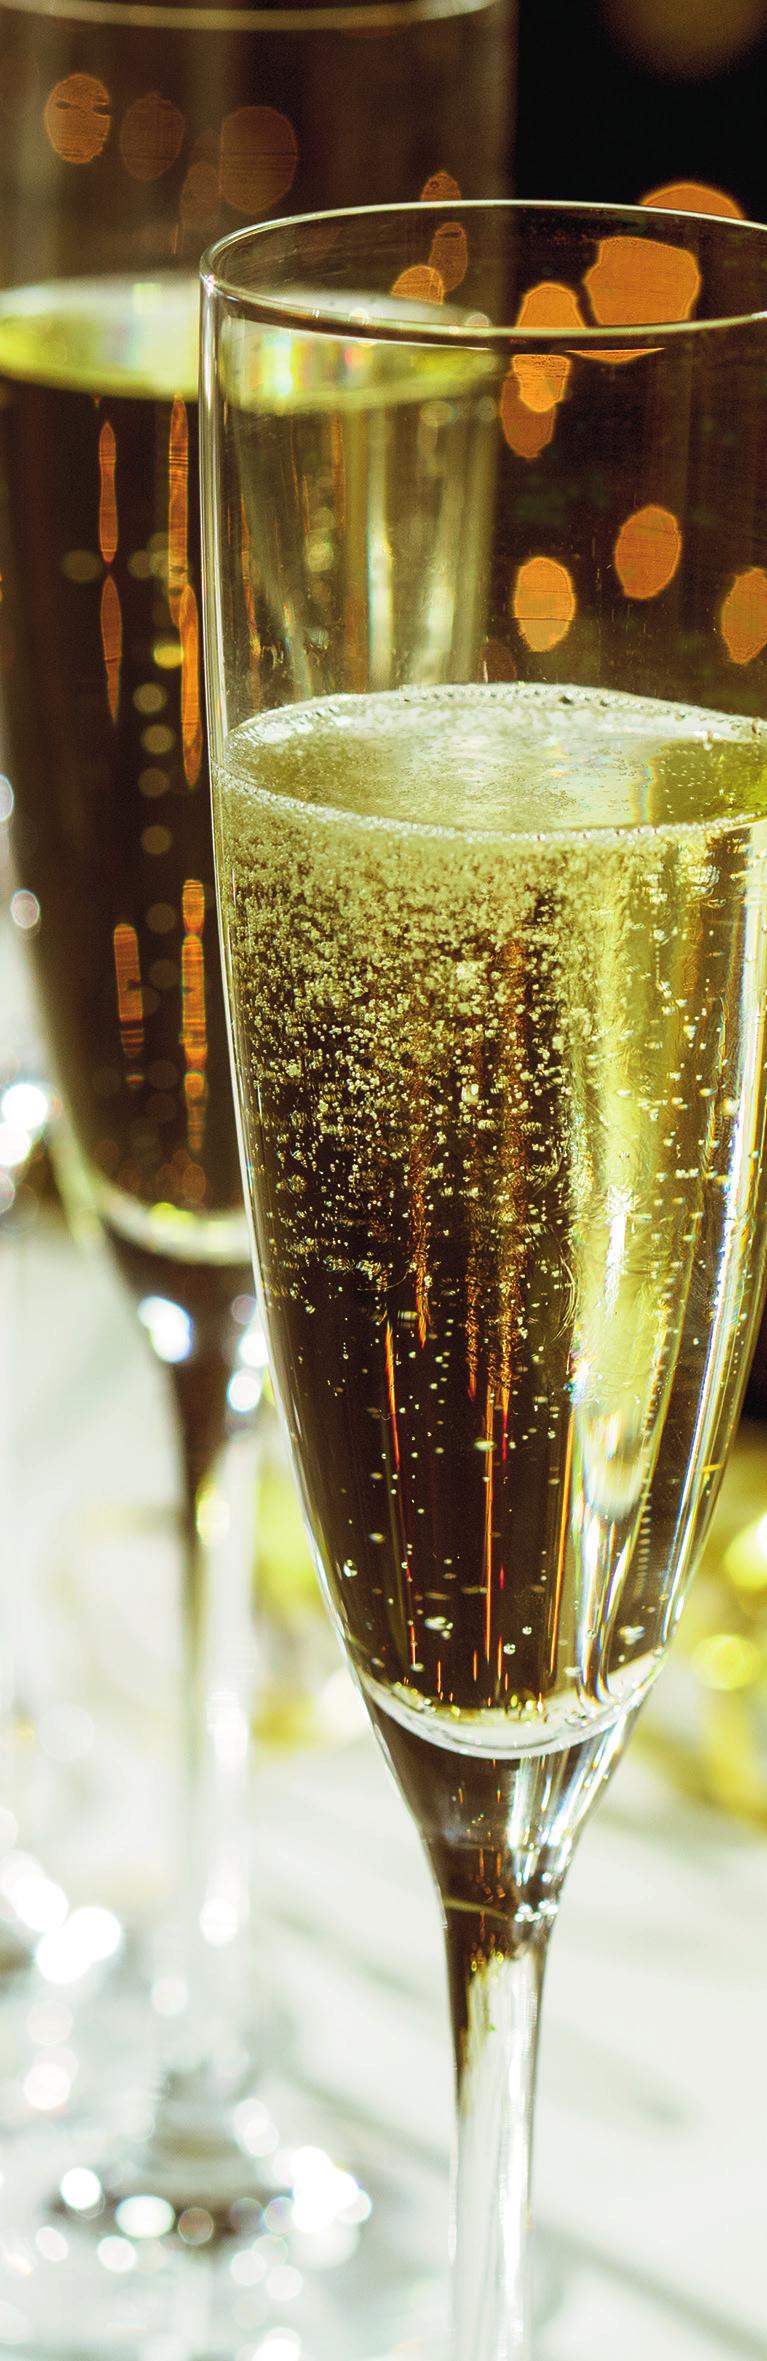 NEW YEAR S EVE GALA DINNER Join us for a sparkling New Year s Eve and welcome 2015 in style!